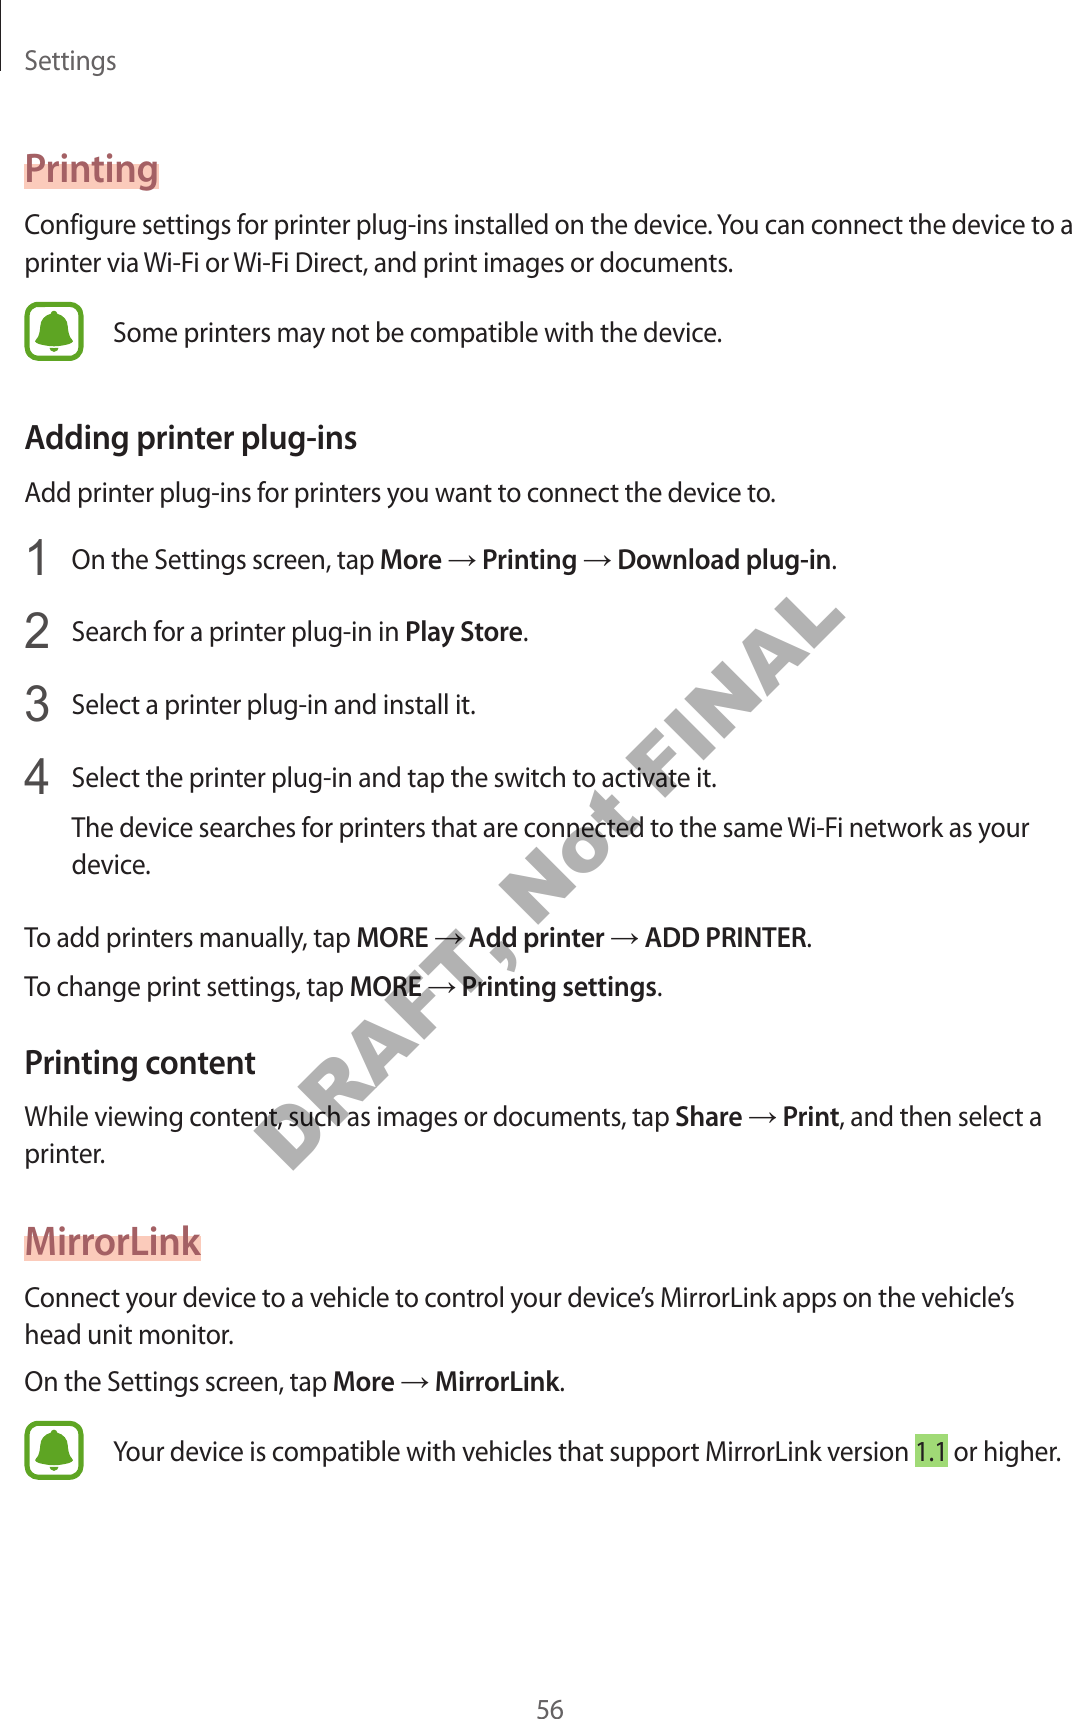 Settings56PrintingConfigure settings for printer plug-ins installed on the device. You can connect the device to a printer via Wi-Fi or Wi-Fi Direct, and print images or documents.Some printers may not be compatible with the device.Adding printer plug-insAdd printer plug-ins for printers you want to connect the device to.1  On the Settings screen, tap More → Printing → Download plug-in.2  Search for a printer plug-in in Play Store.3  Select a printer plug-in and install it.4  Select the printer plug-in and tap the switch to activate it.The device searches for printers that are connected to the same Wi-Fi network as your device.To add printers manually, tap MORE → Add printer → ADD PRINTER.To change print settings, tap MORE → Printing settings.Printing contentWhile viewing content, such as images or documents, tap Share → Print, and then select a printer.MirrorLinkConnect your device to a vehicle to control your device’s MirrorLink apps on the vehicle’s head unit monitor.On the Settings screen, tap More → MirrorLink.Your device is compatible with vehicles that support MirrorLink version 1.1 or higher.DRAFT, Not FINAL